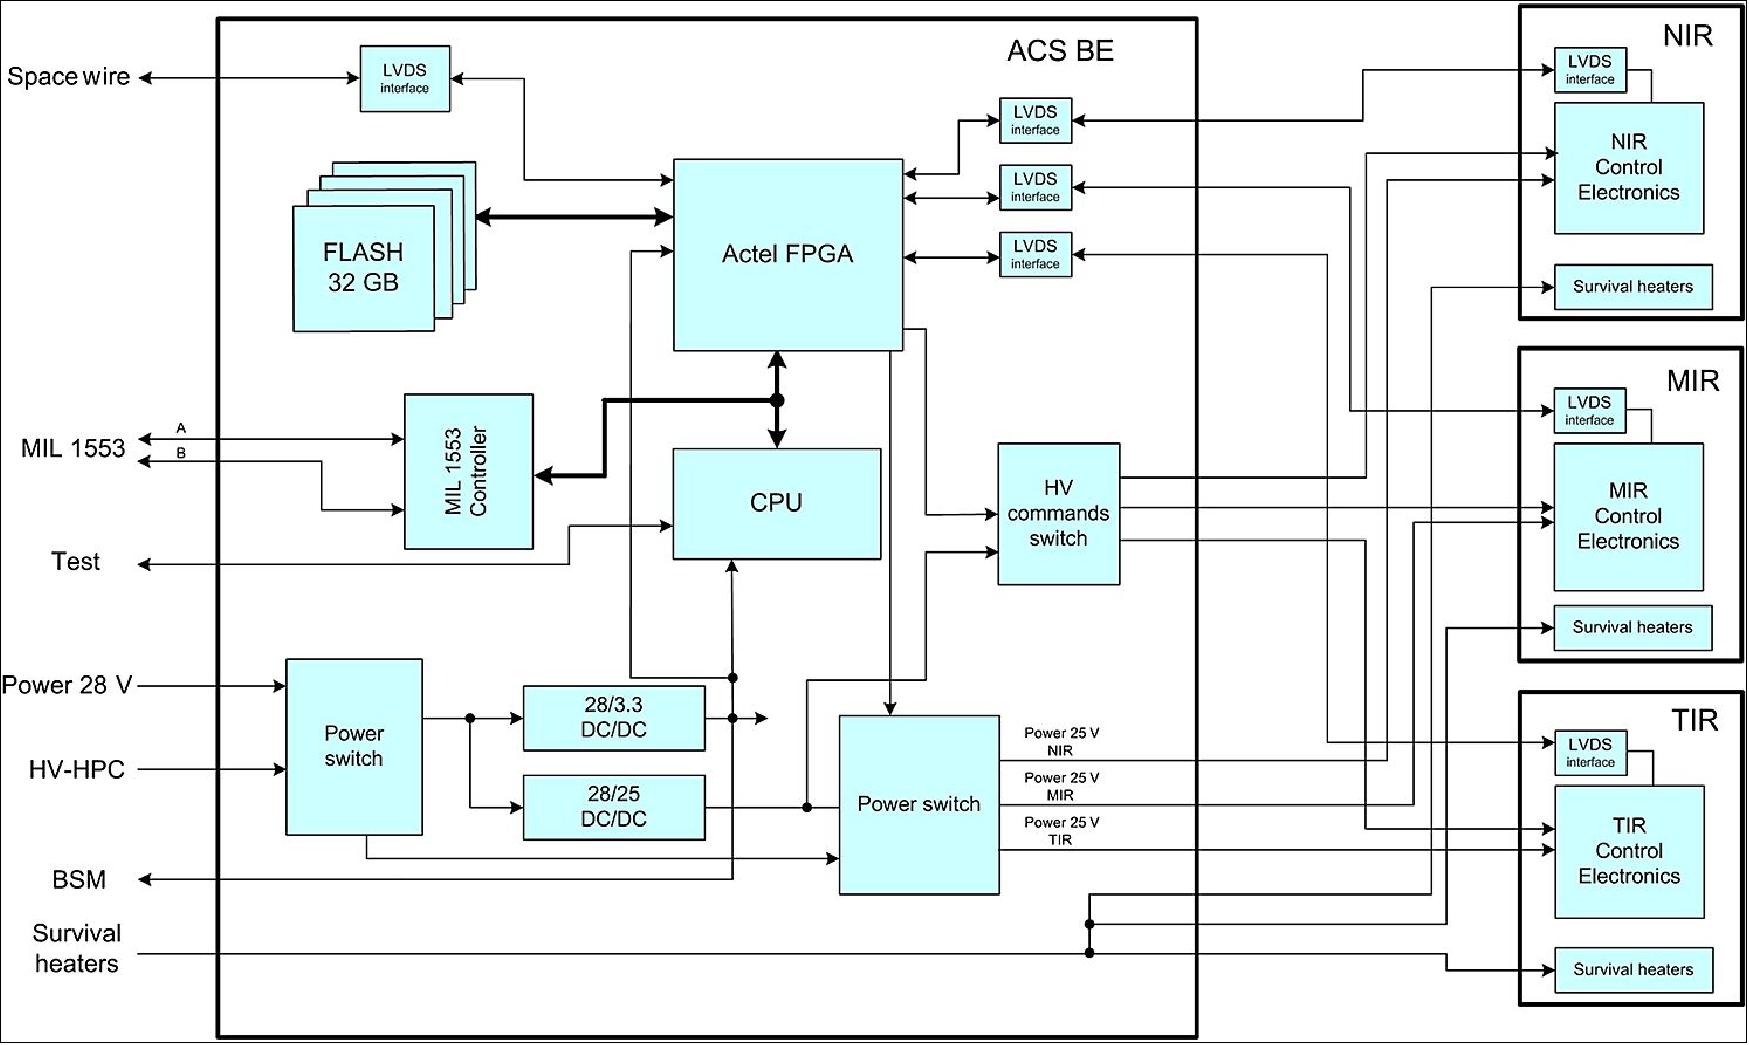 Figure 134: The ACS block diagram. The common electronic block (BE) serves as a single electrical interface of the ACS to the spacecraft in terms of power, commands, and data (image credit: IKI)